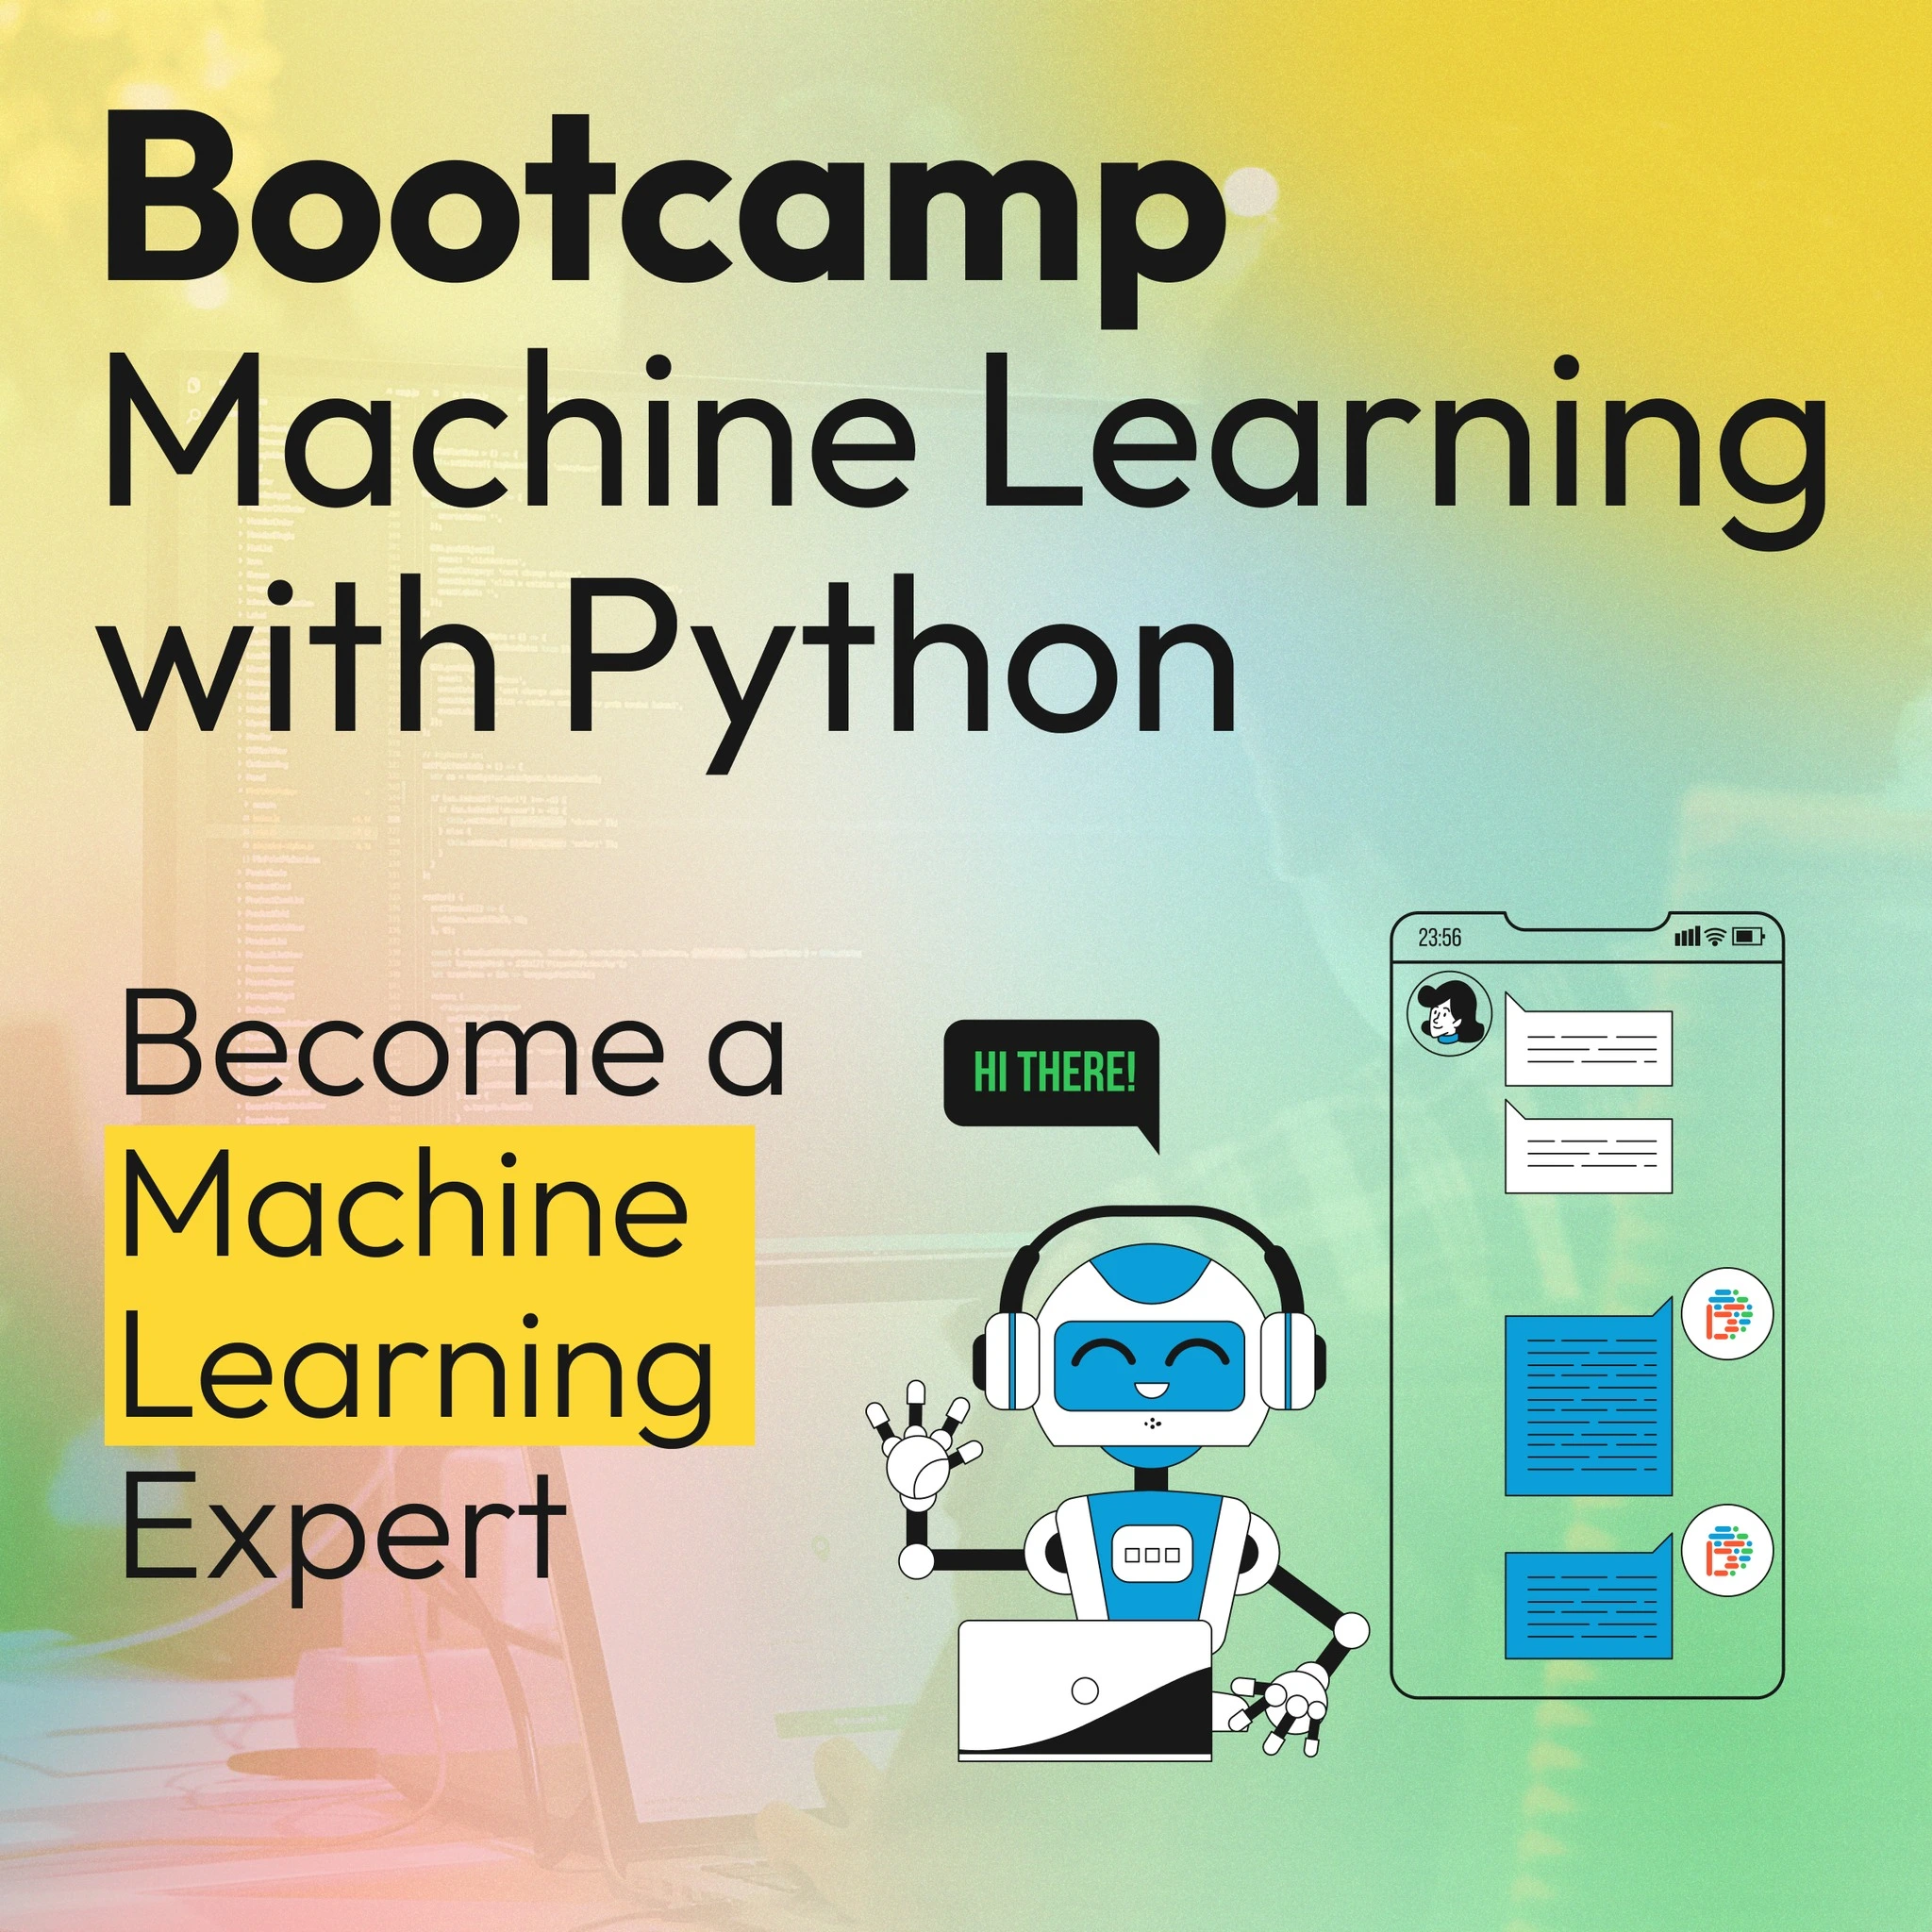 Bootcamp: Machine Learning With Python